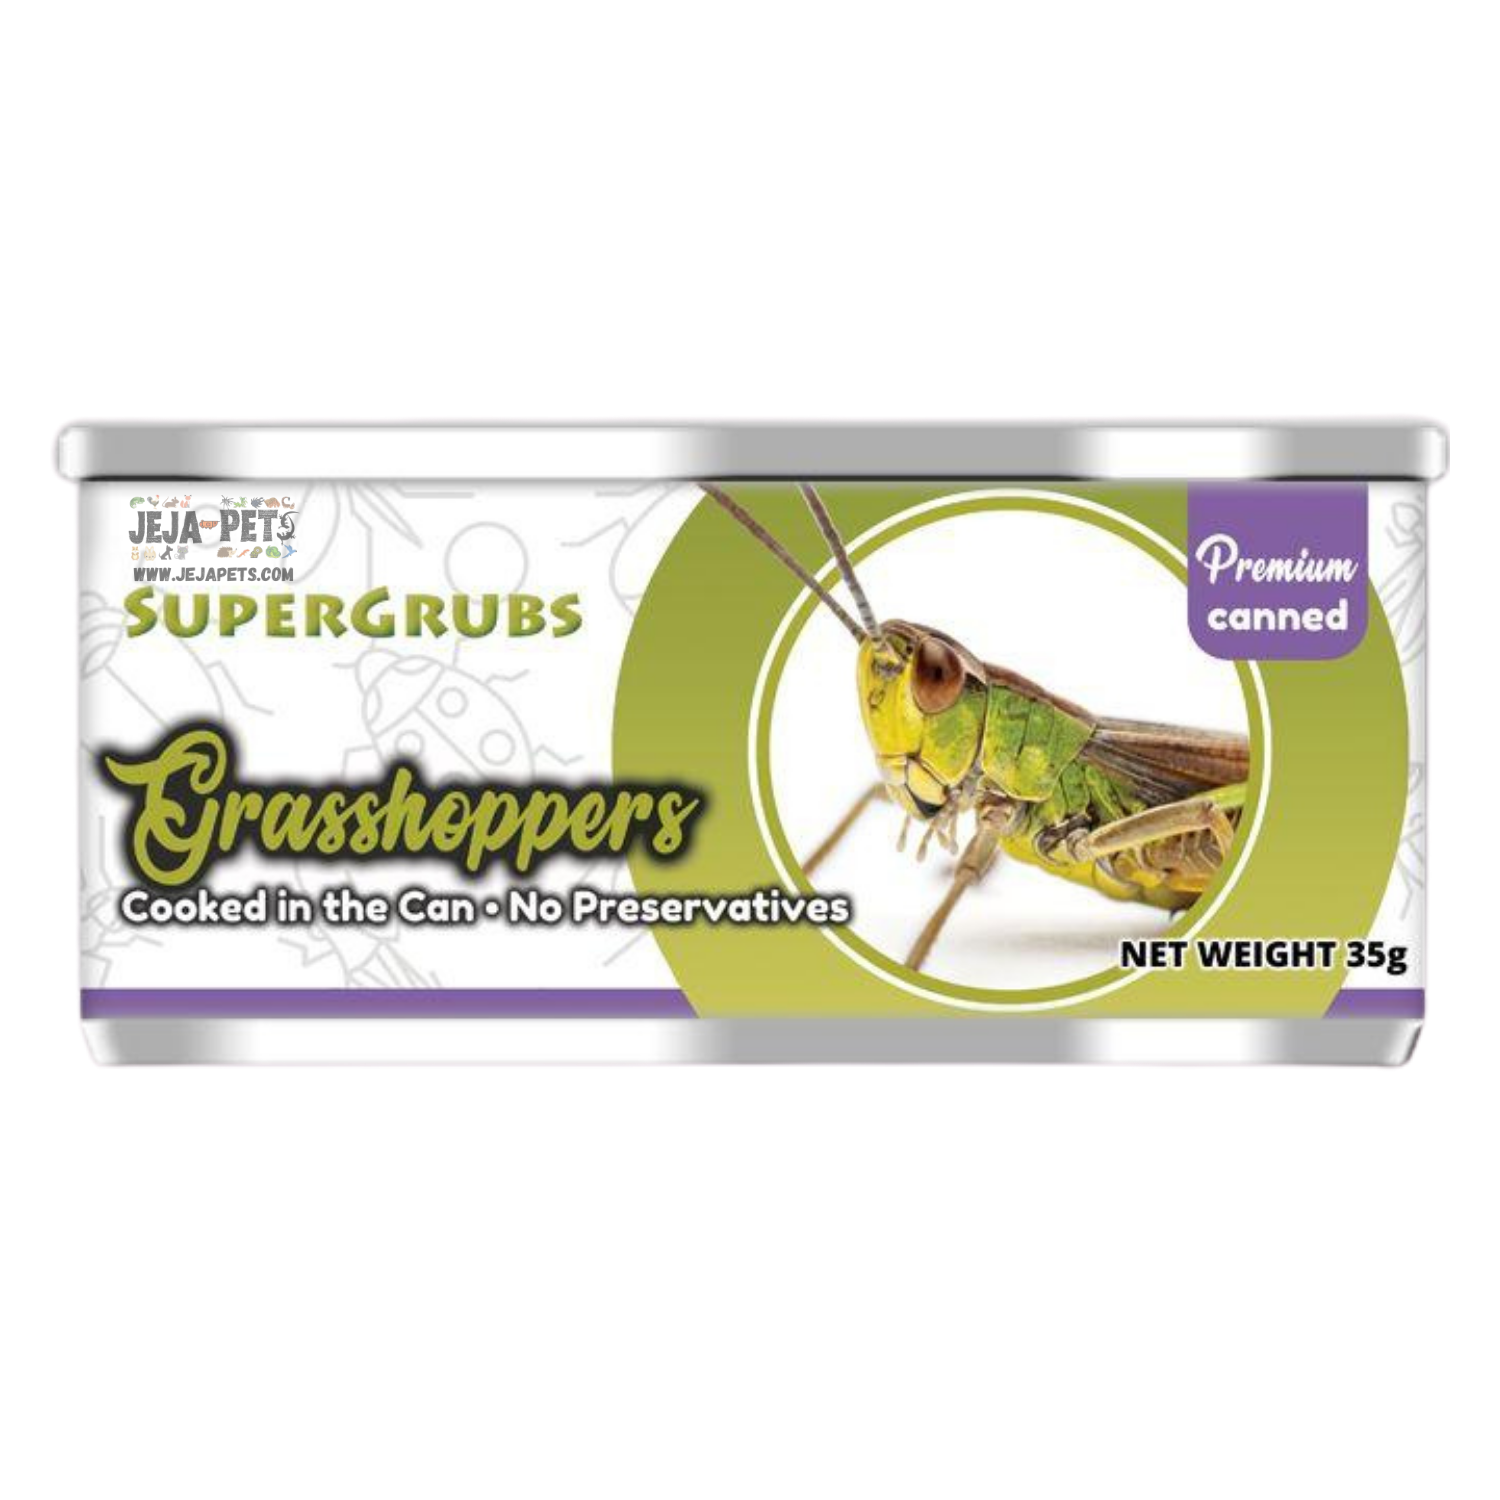 [DISCONTINUED] Supergrubs Canned Grasshoppers - 35g